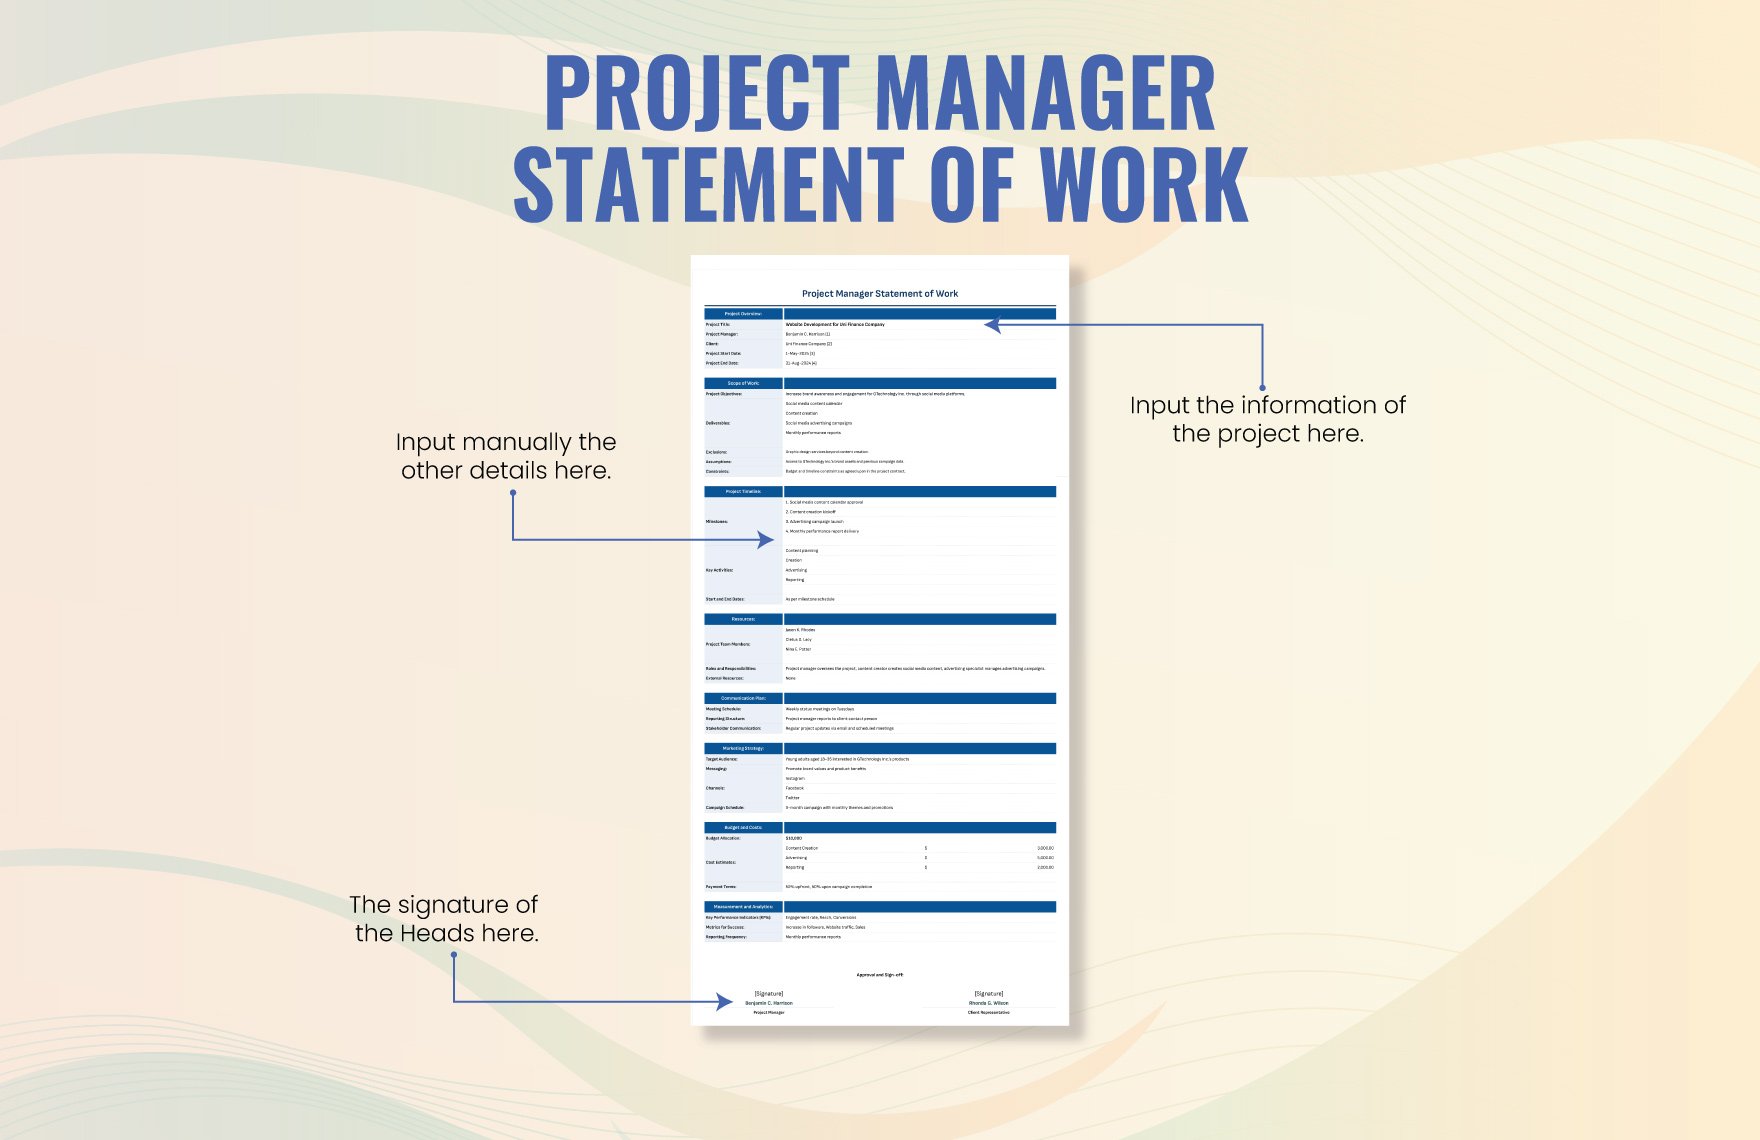 Project Manager Statement of Work Template